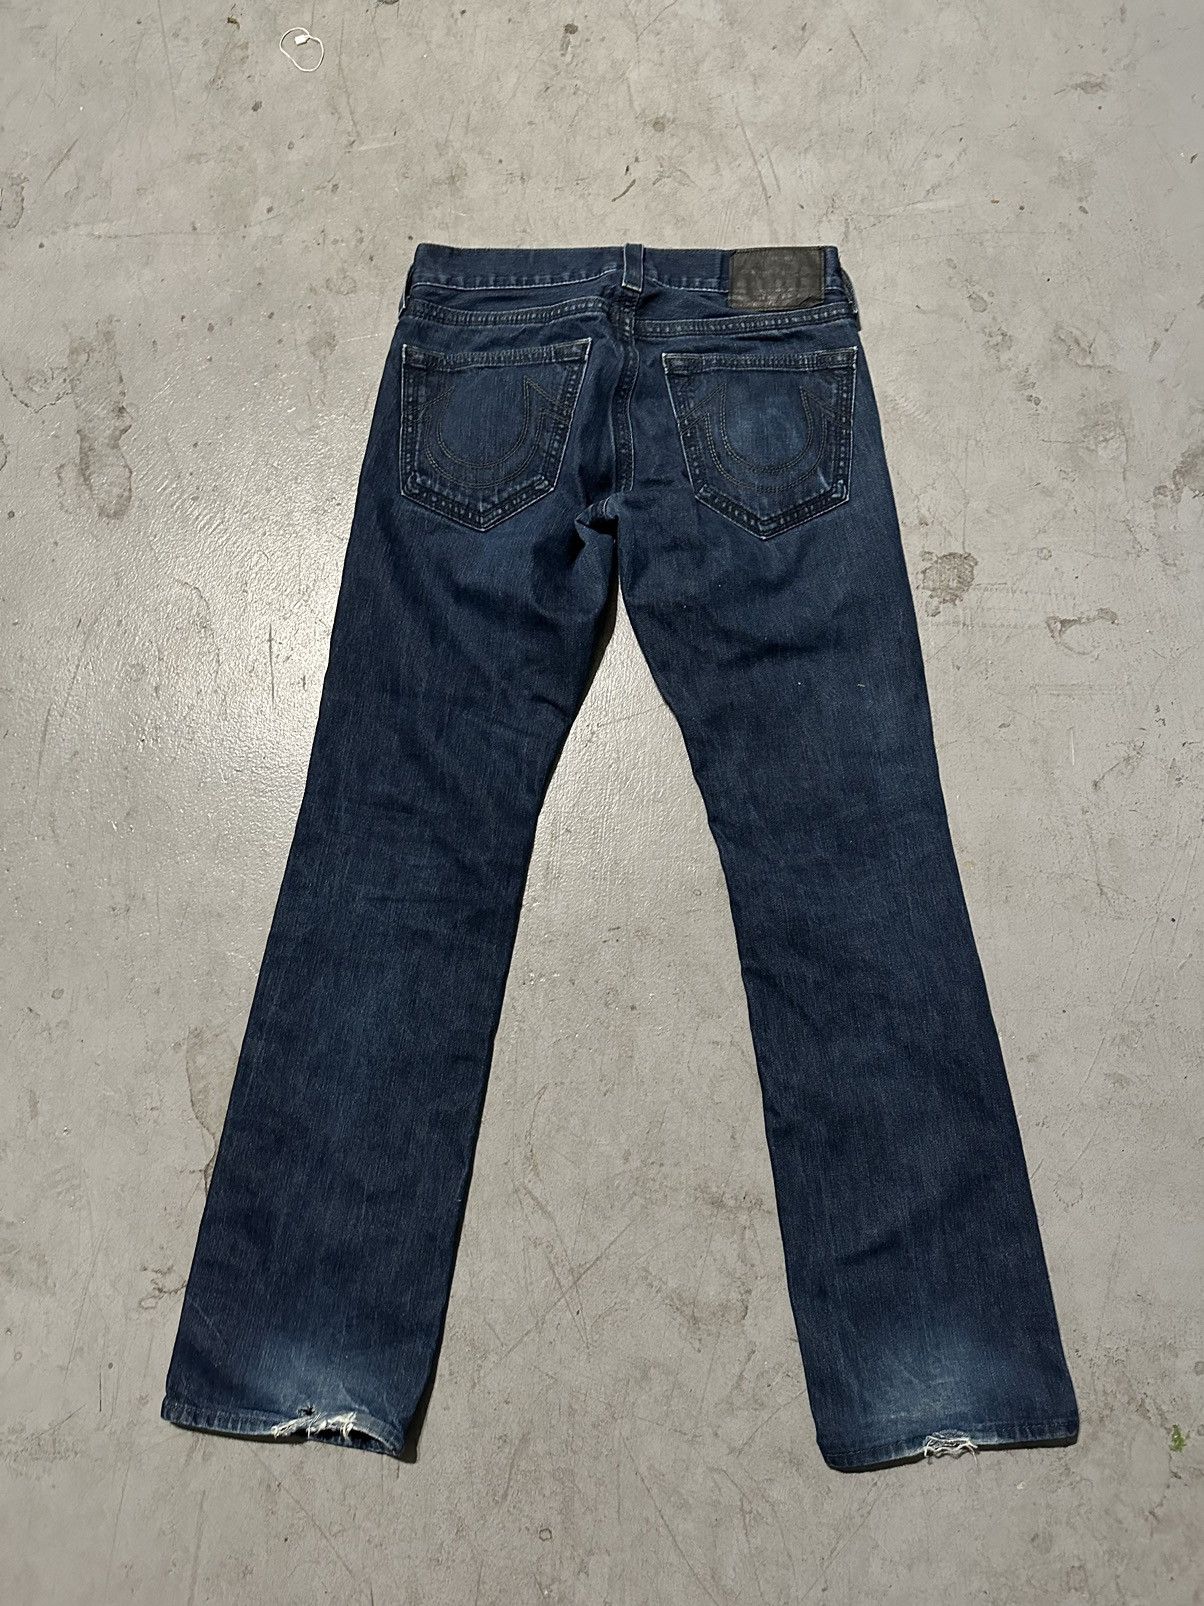 True Religion Vintage True Religion Relaxed Fit Bobby Style Denim Jeans Size US 31 - 2 Preview